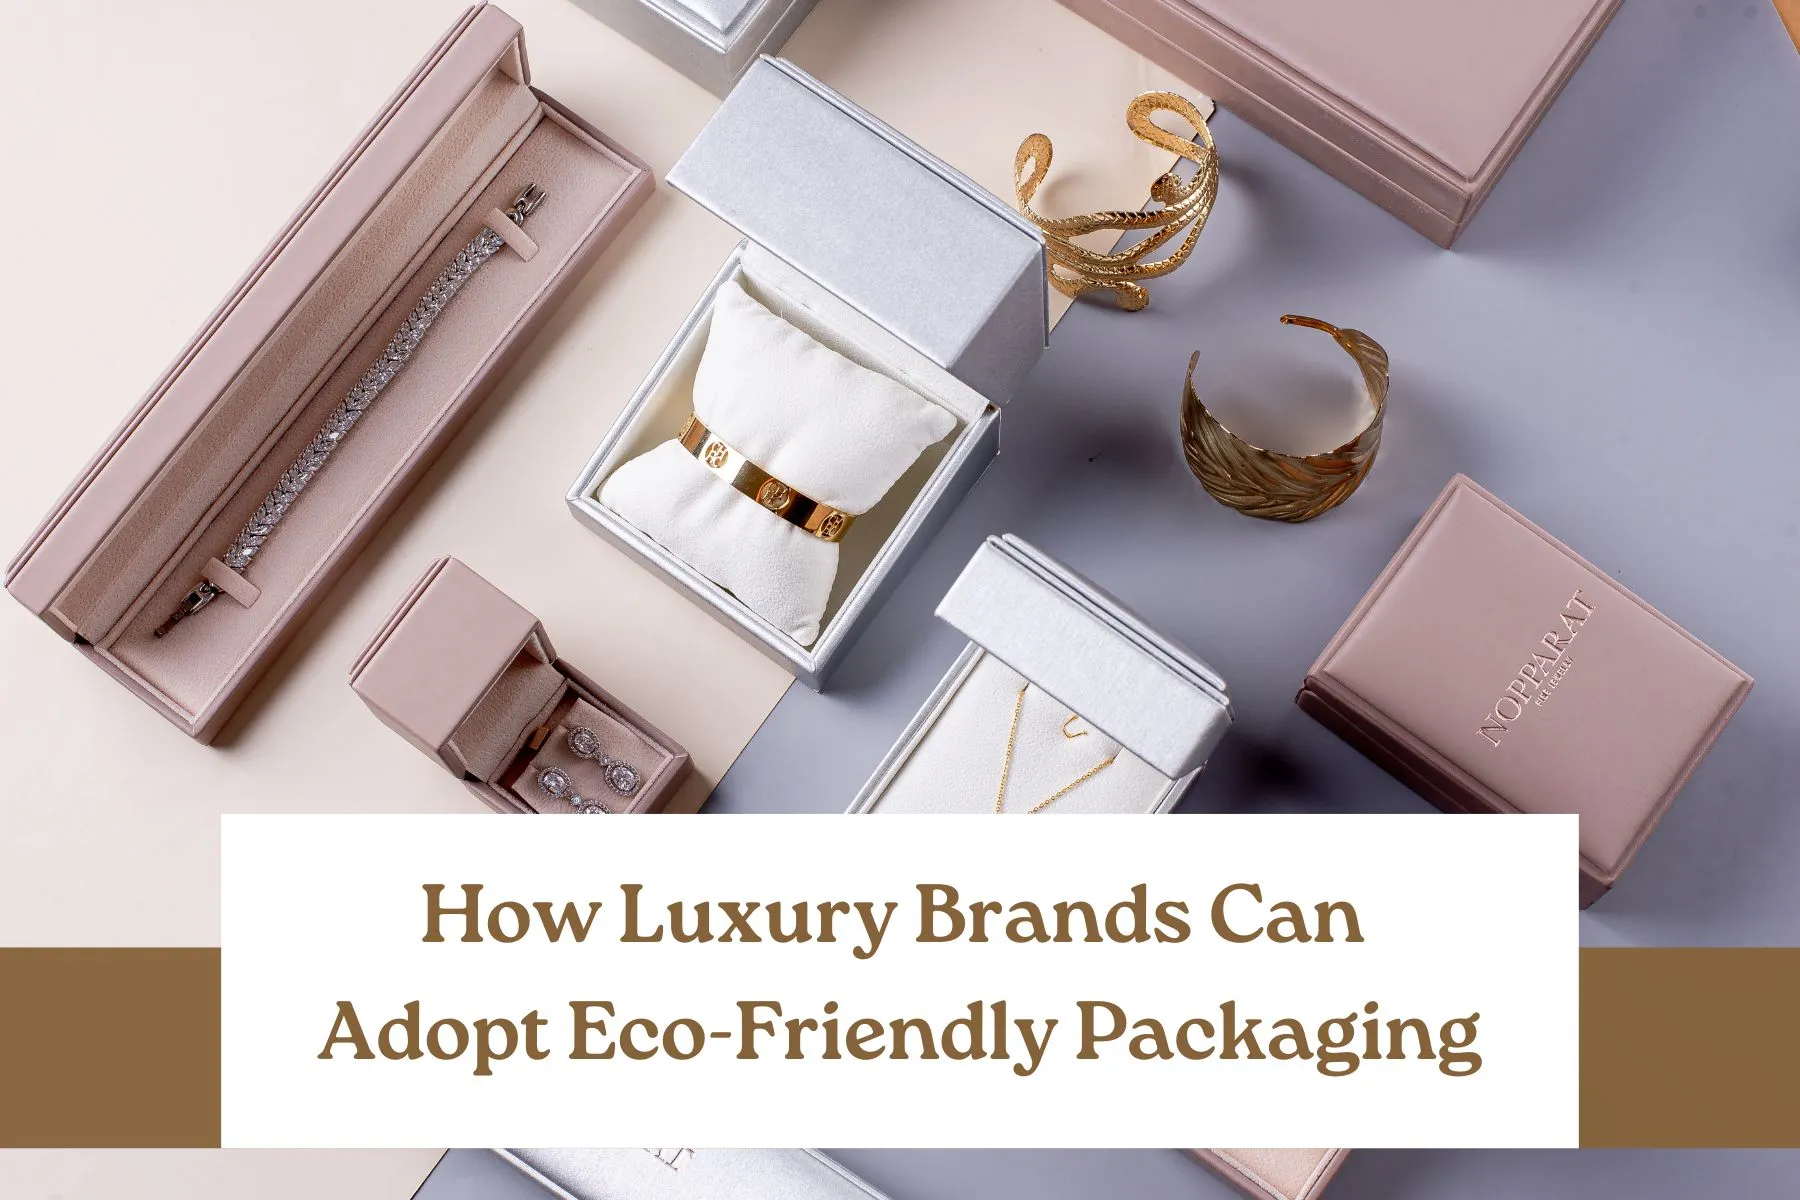 How Luxury Brands Can Adopt Eco-Friendly Packaging